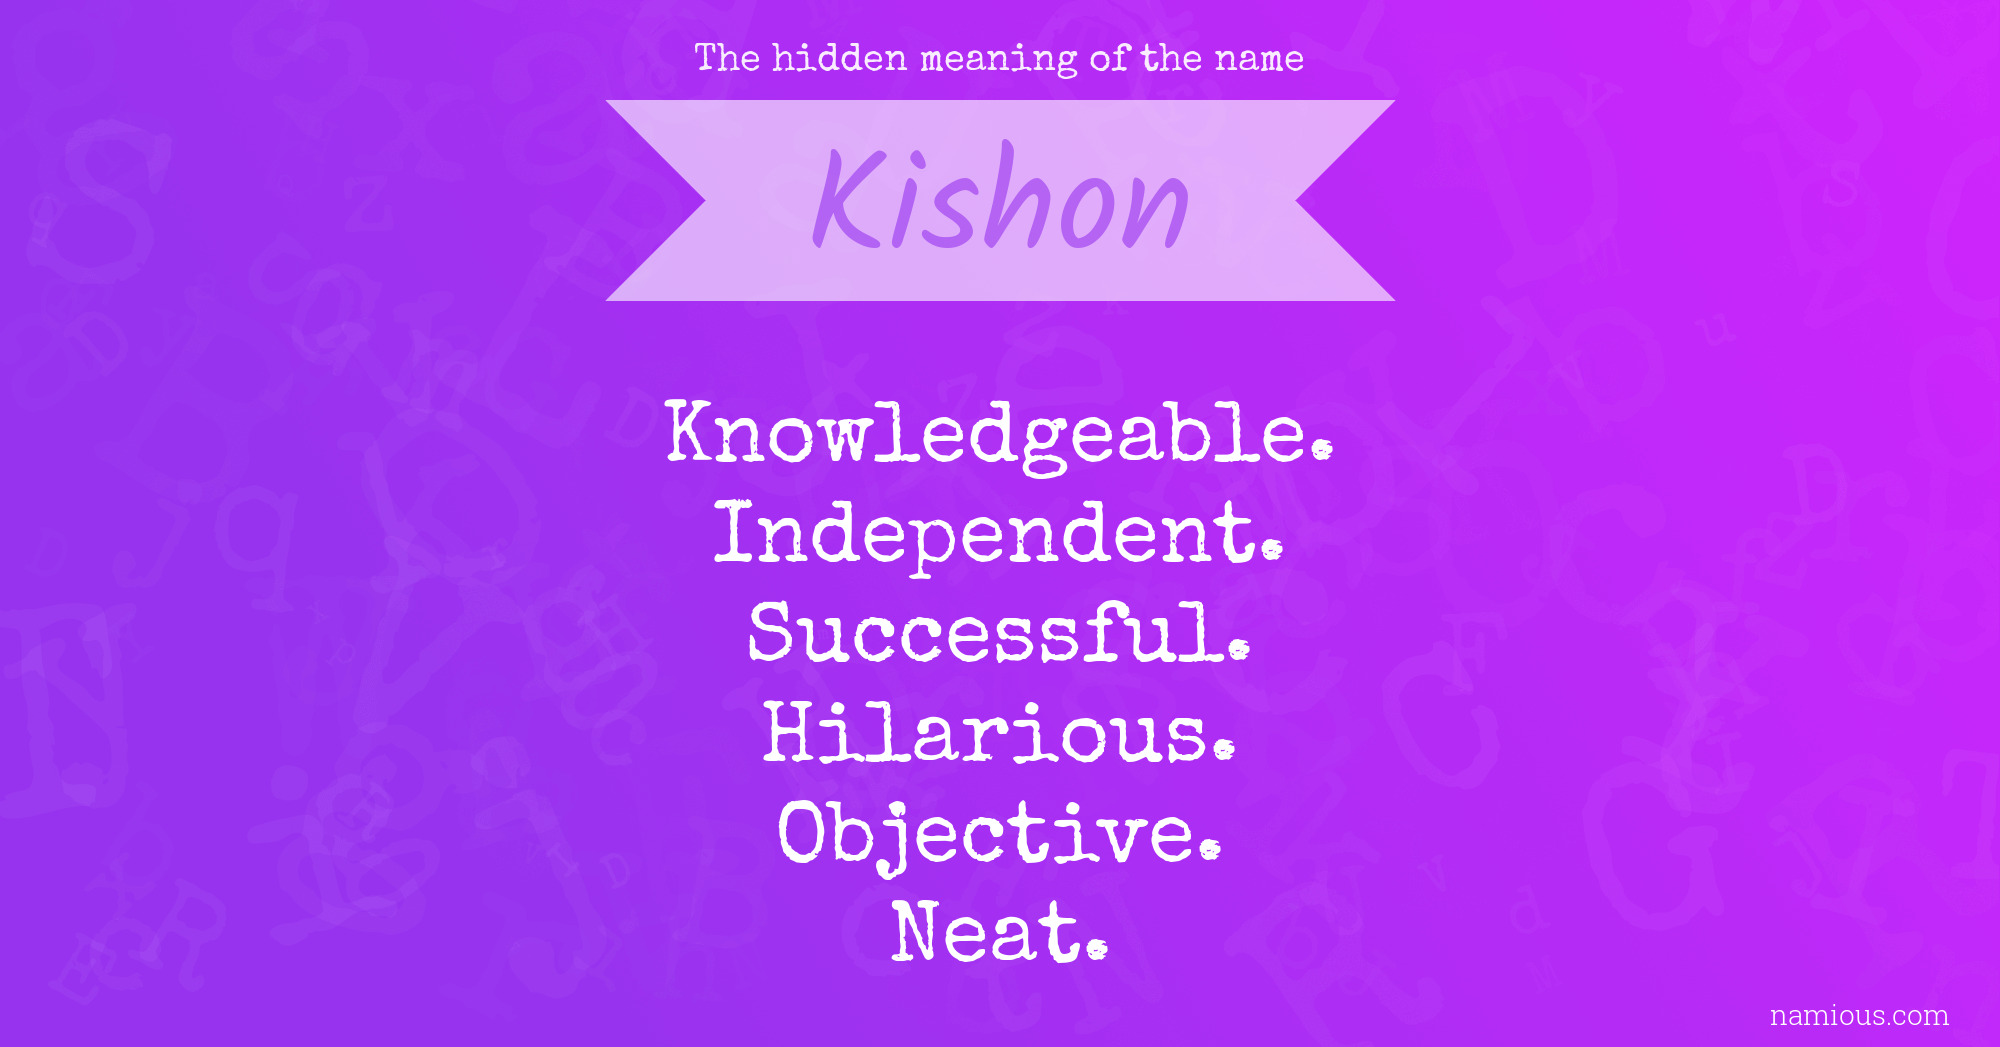 The hidden meaning of the name Kishon